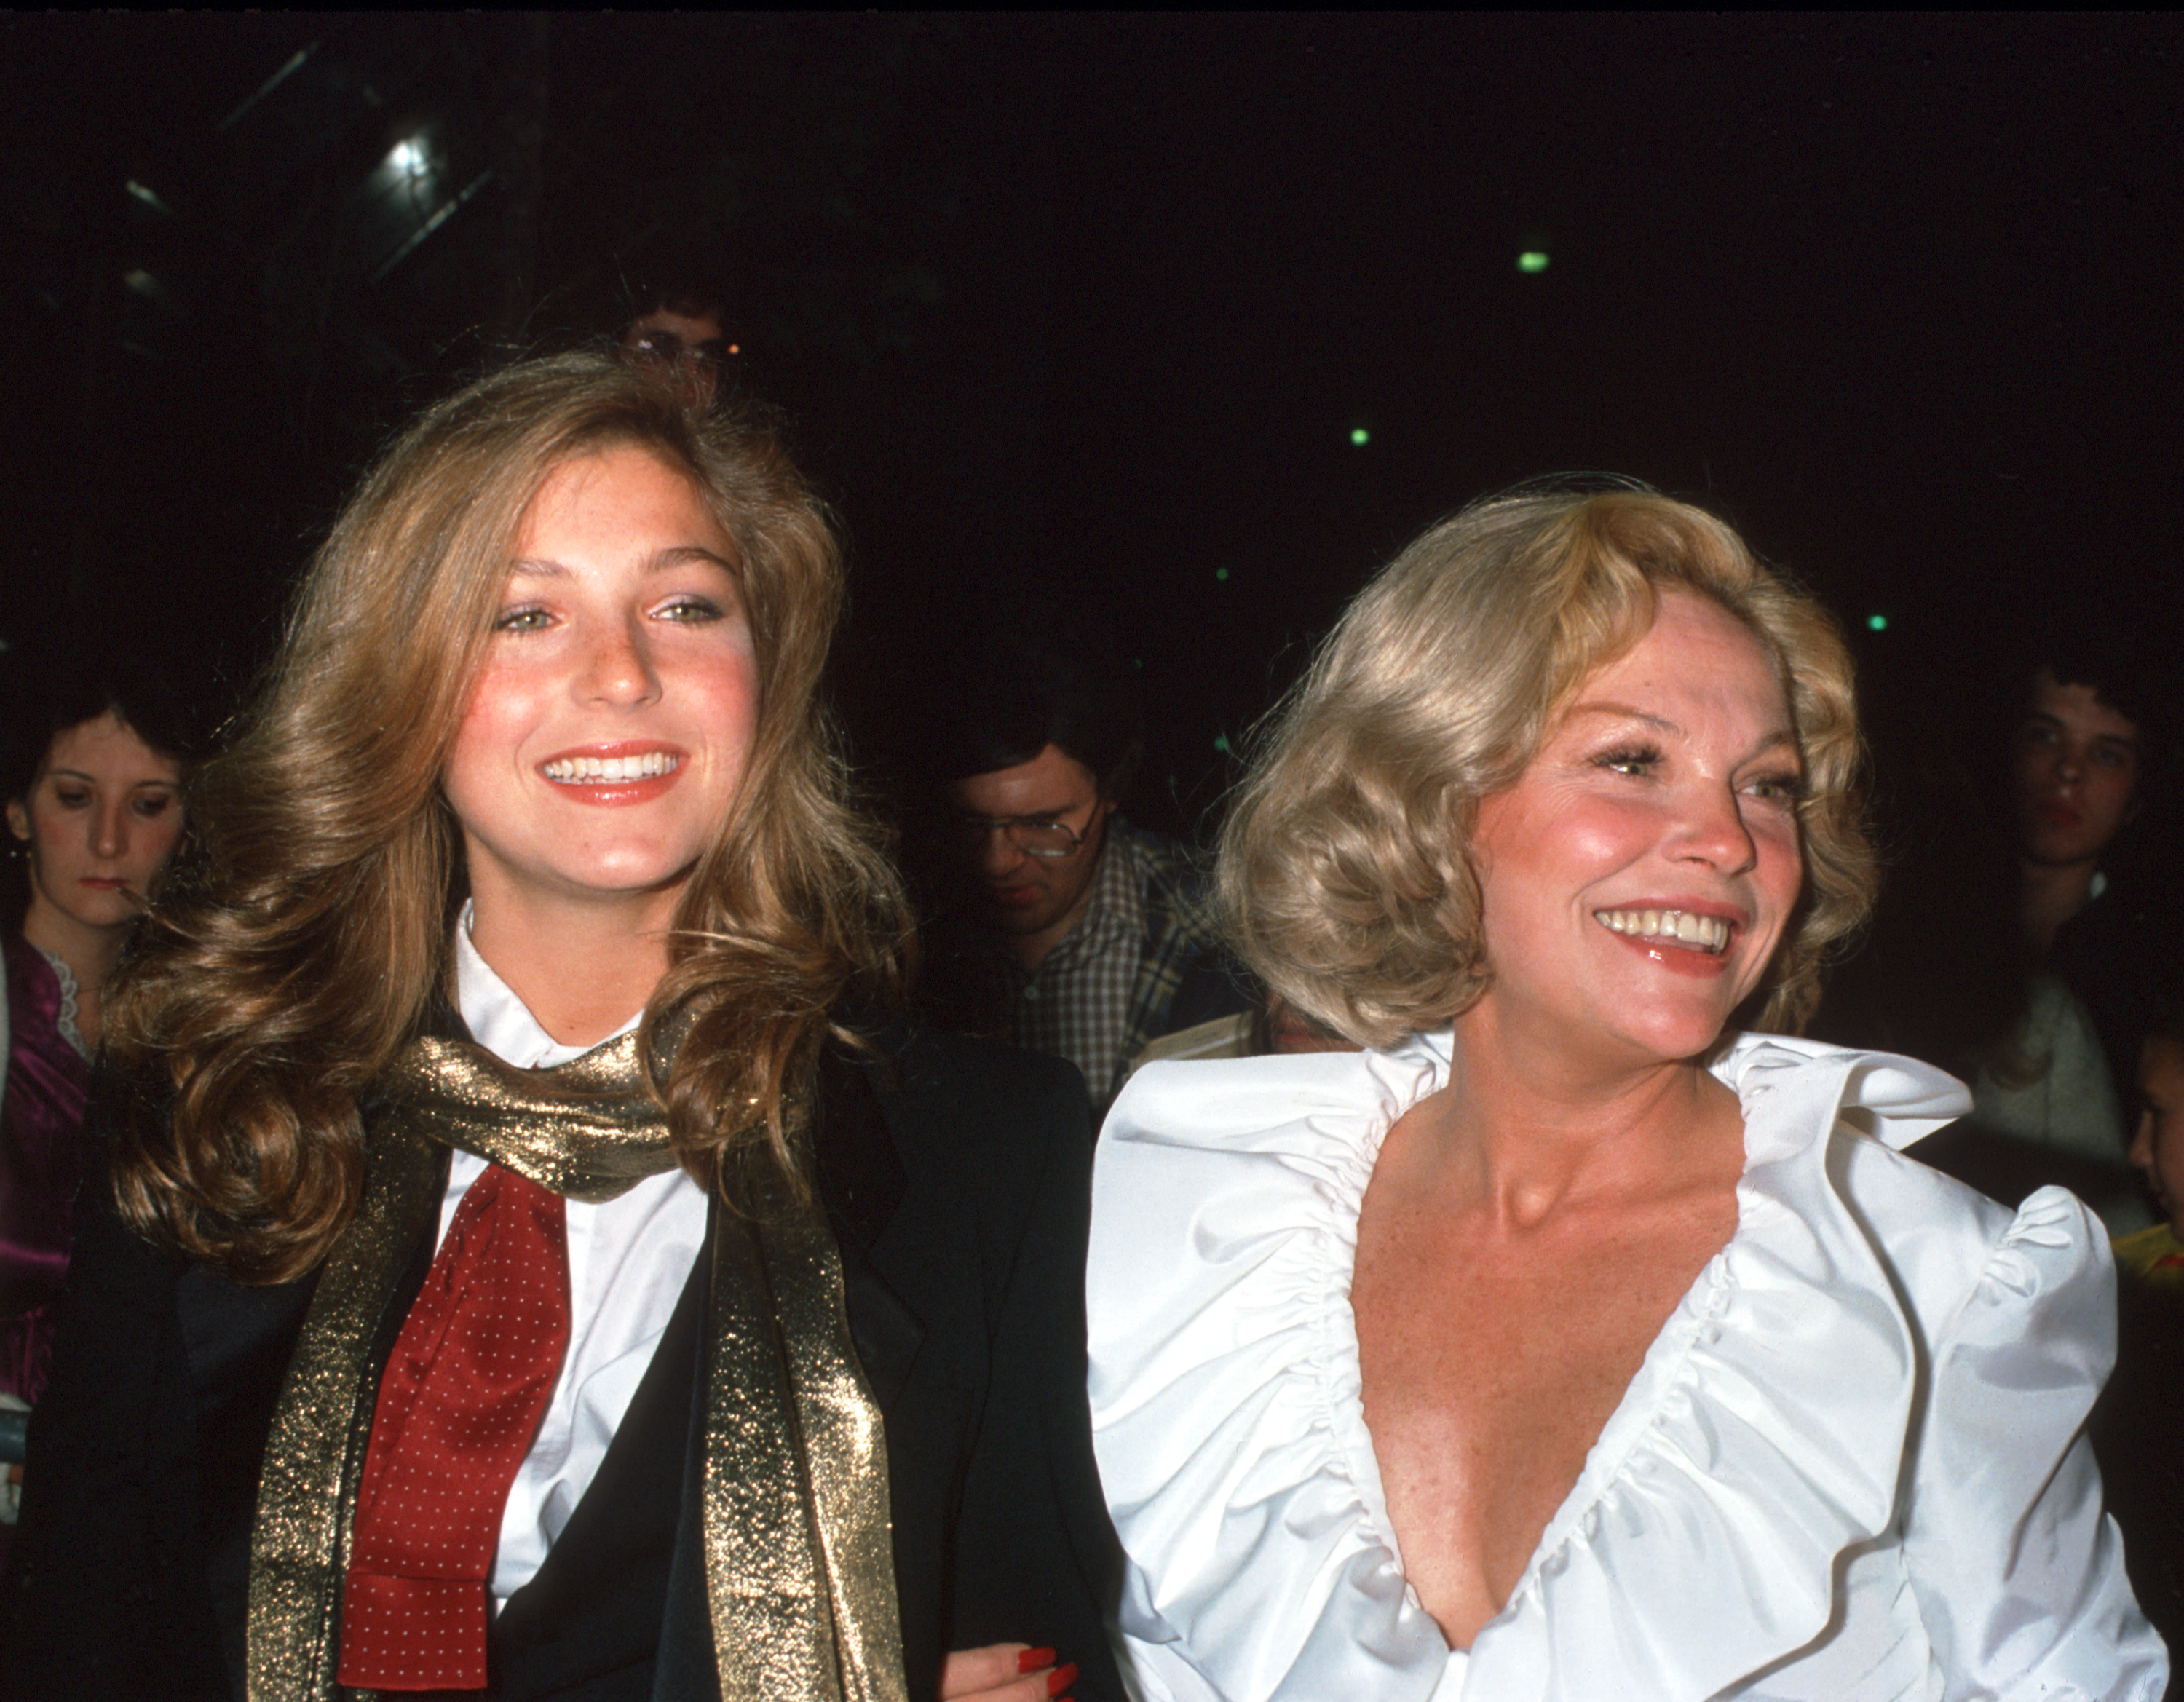 Photo of Tatum ONeal Photo by Michael Ochs Archive, CIRCA 1970. | Source: Getty Images